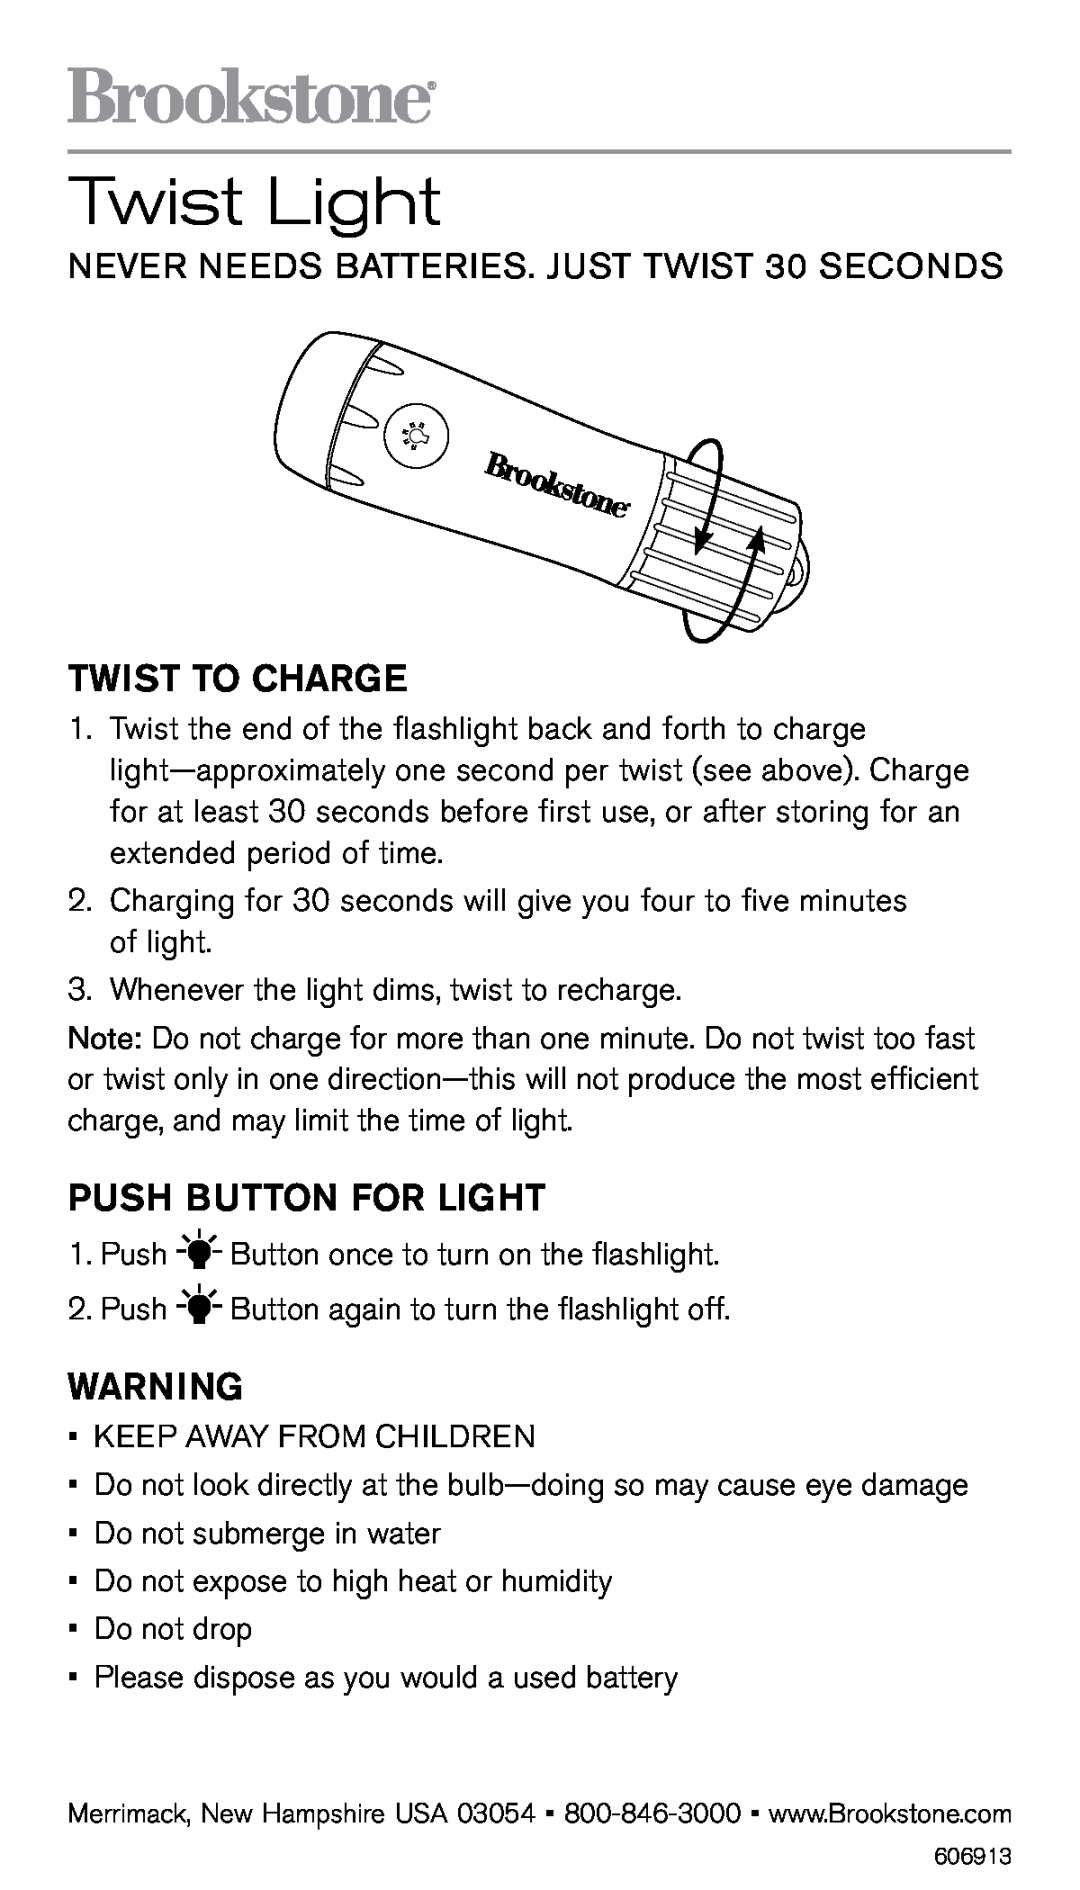 Brookstone 606013 manual Twist Light, Never needs batteries. Just twist 30 seconds, Twist to charge, Push button for light 